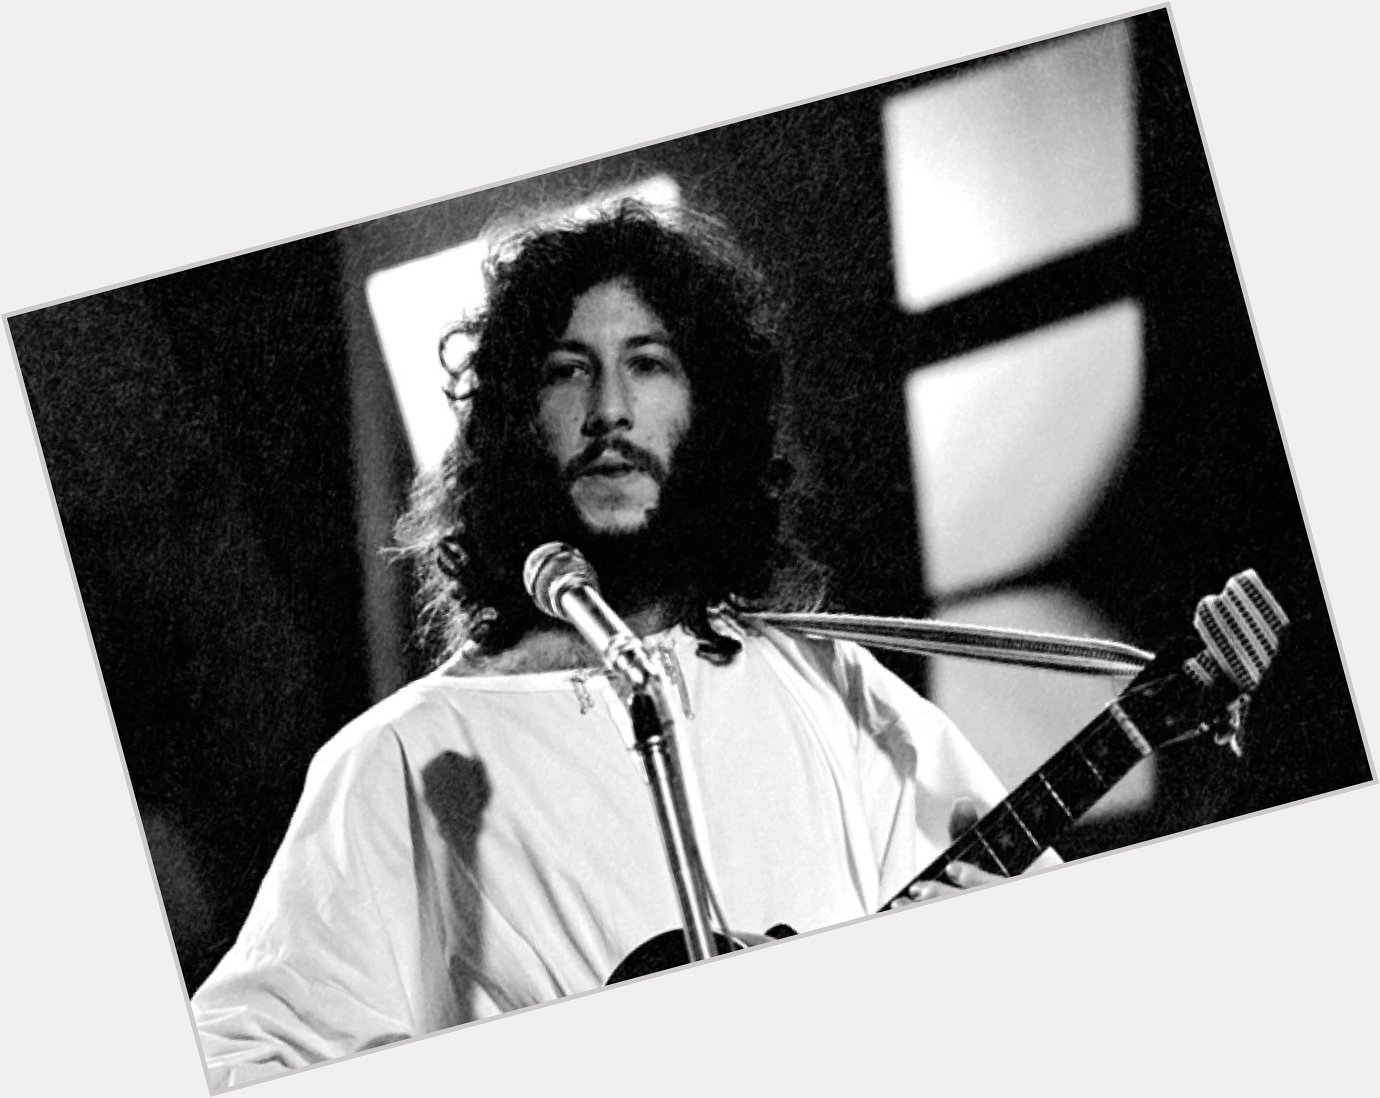 Happy 73rd Birthday to Peter Green, the founder of Fleetwood Mac. 